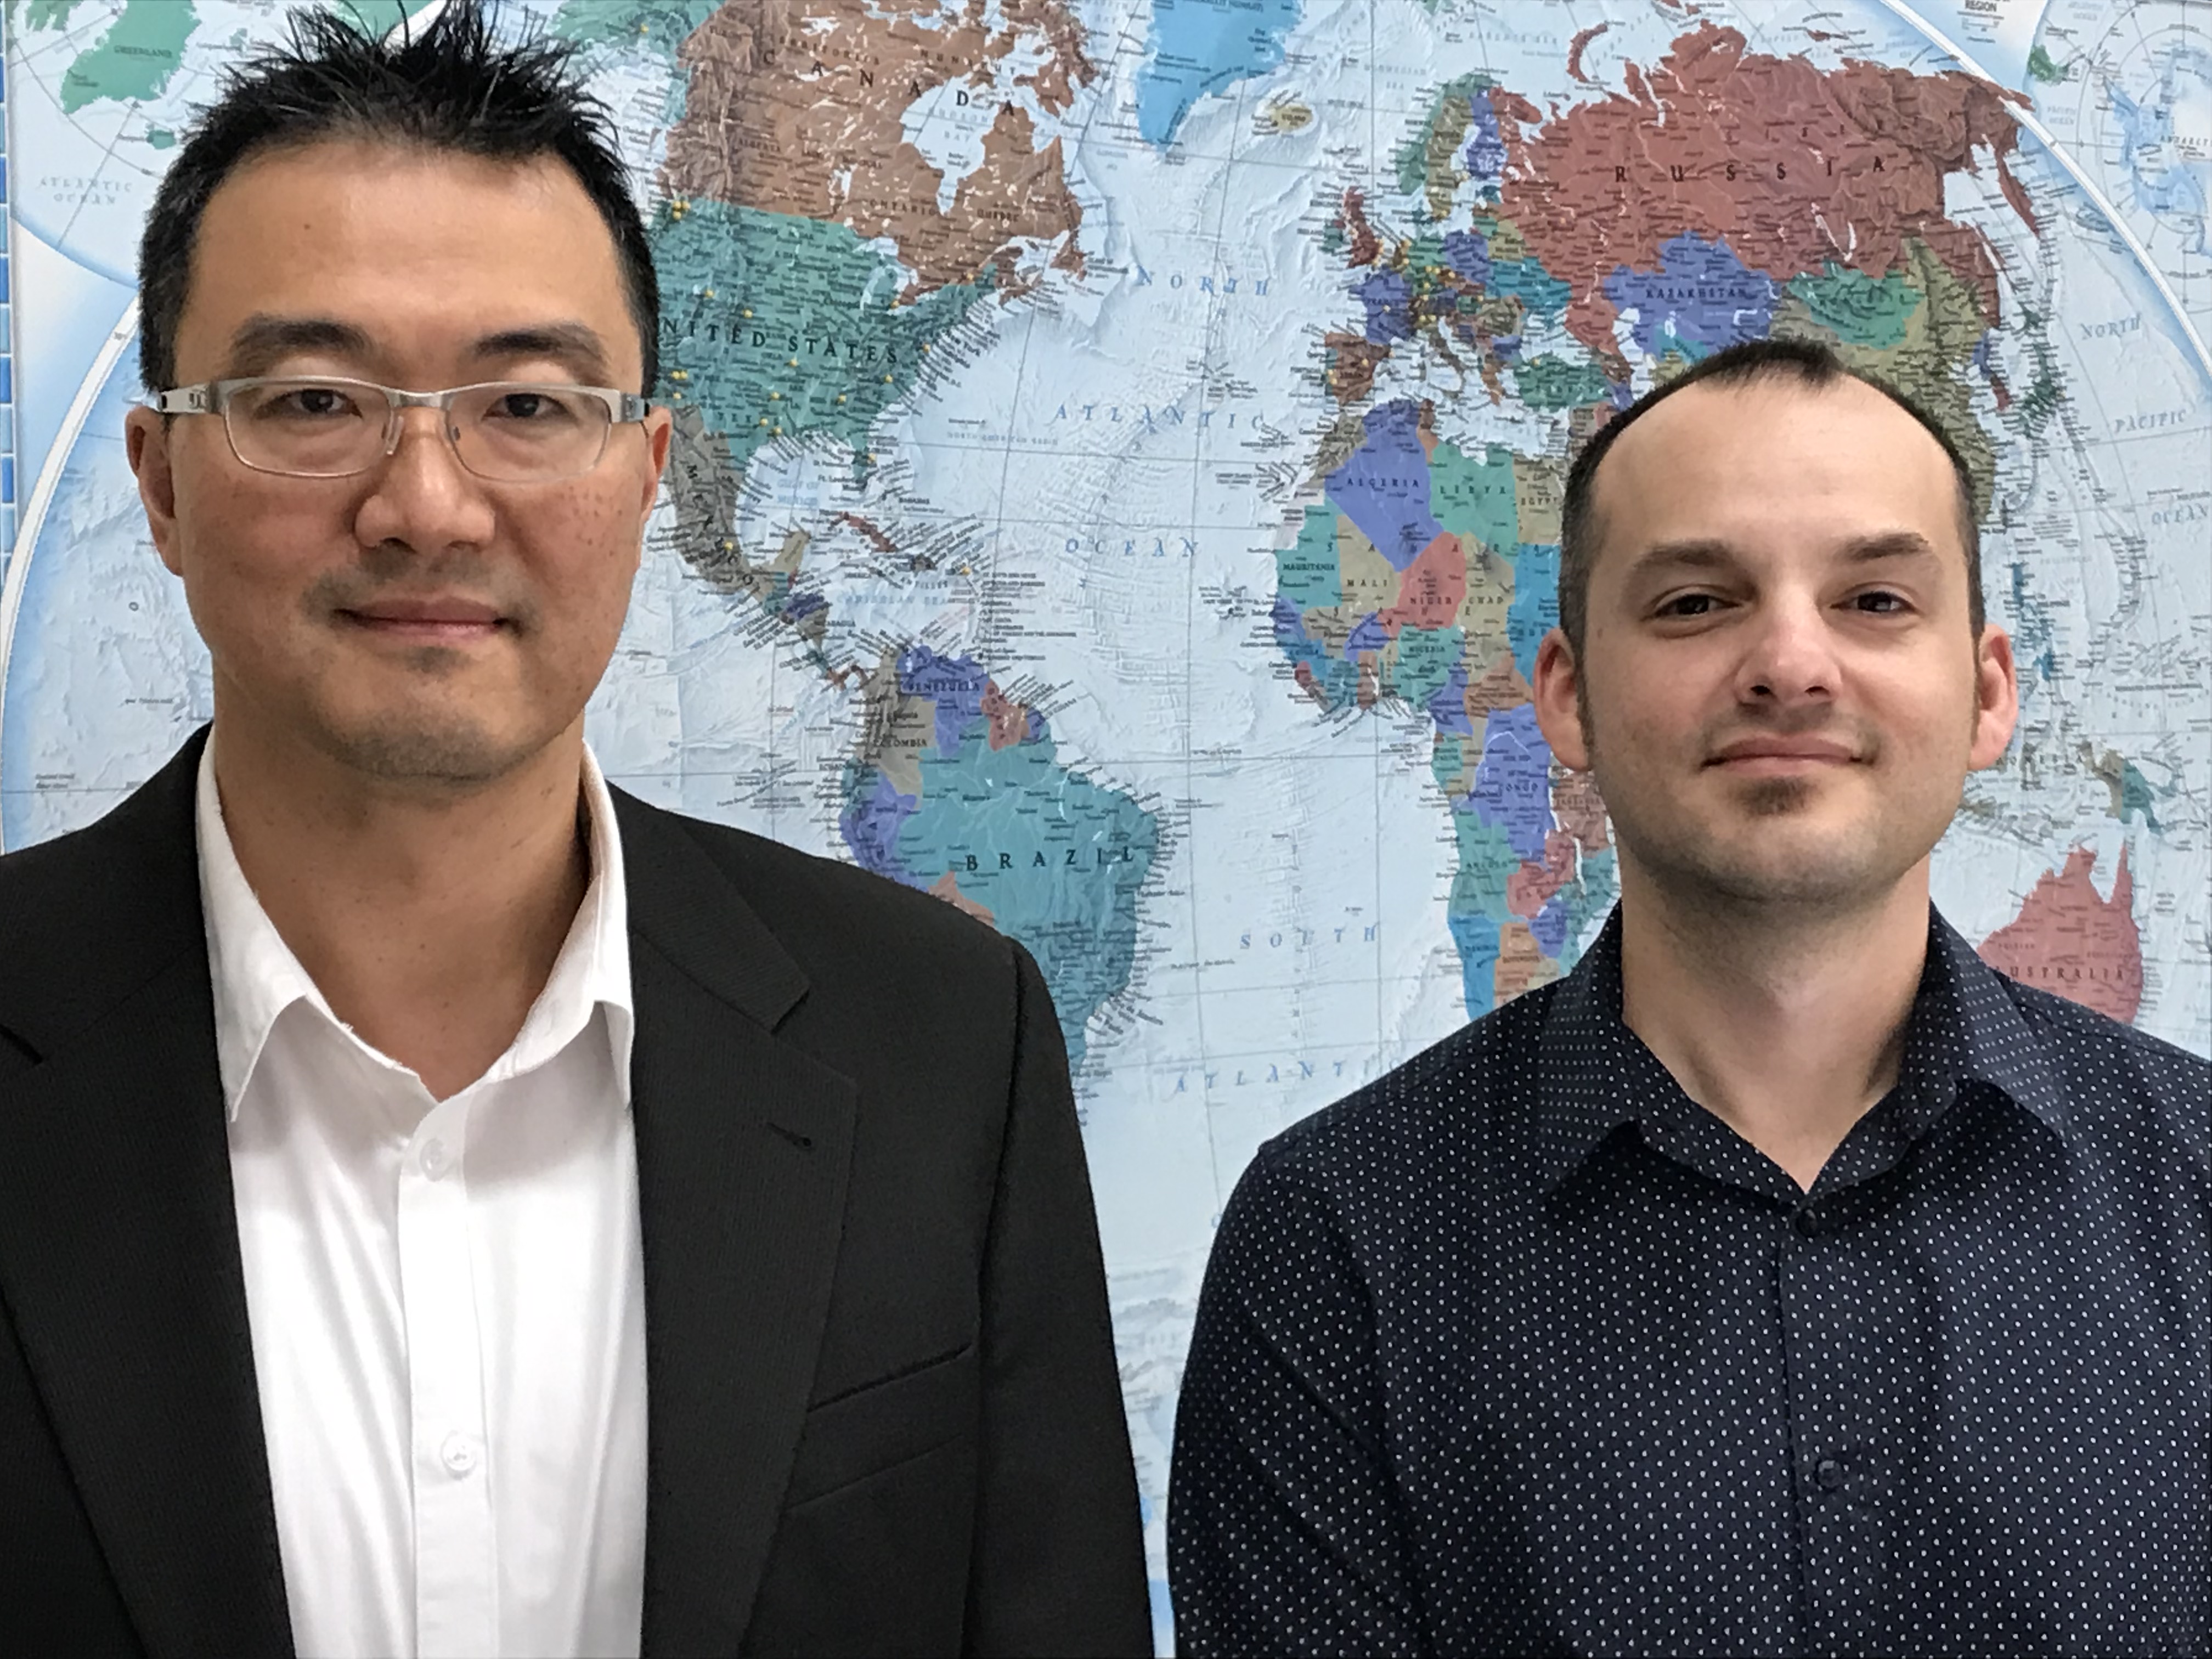 Michael Wei and Daniel Rizo have passed the California Professional Engineers licensing exam.